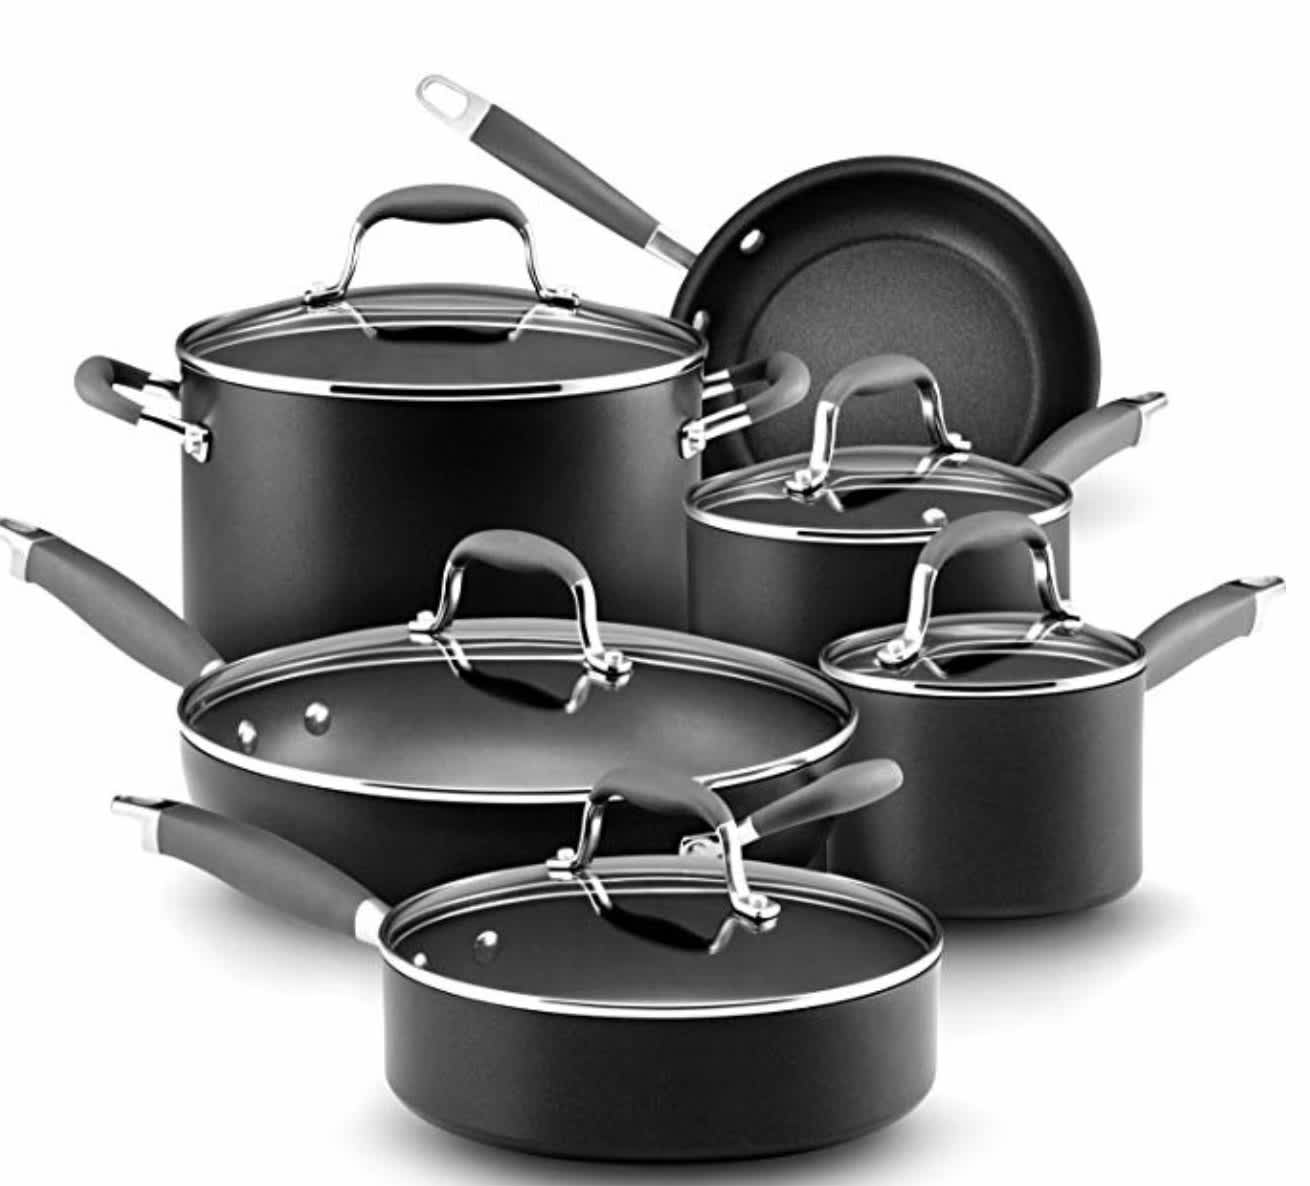 Best cookware sets of 2019